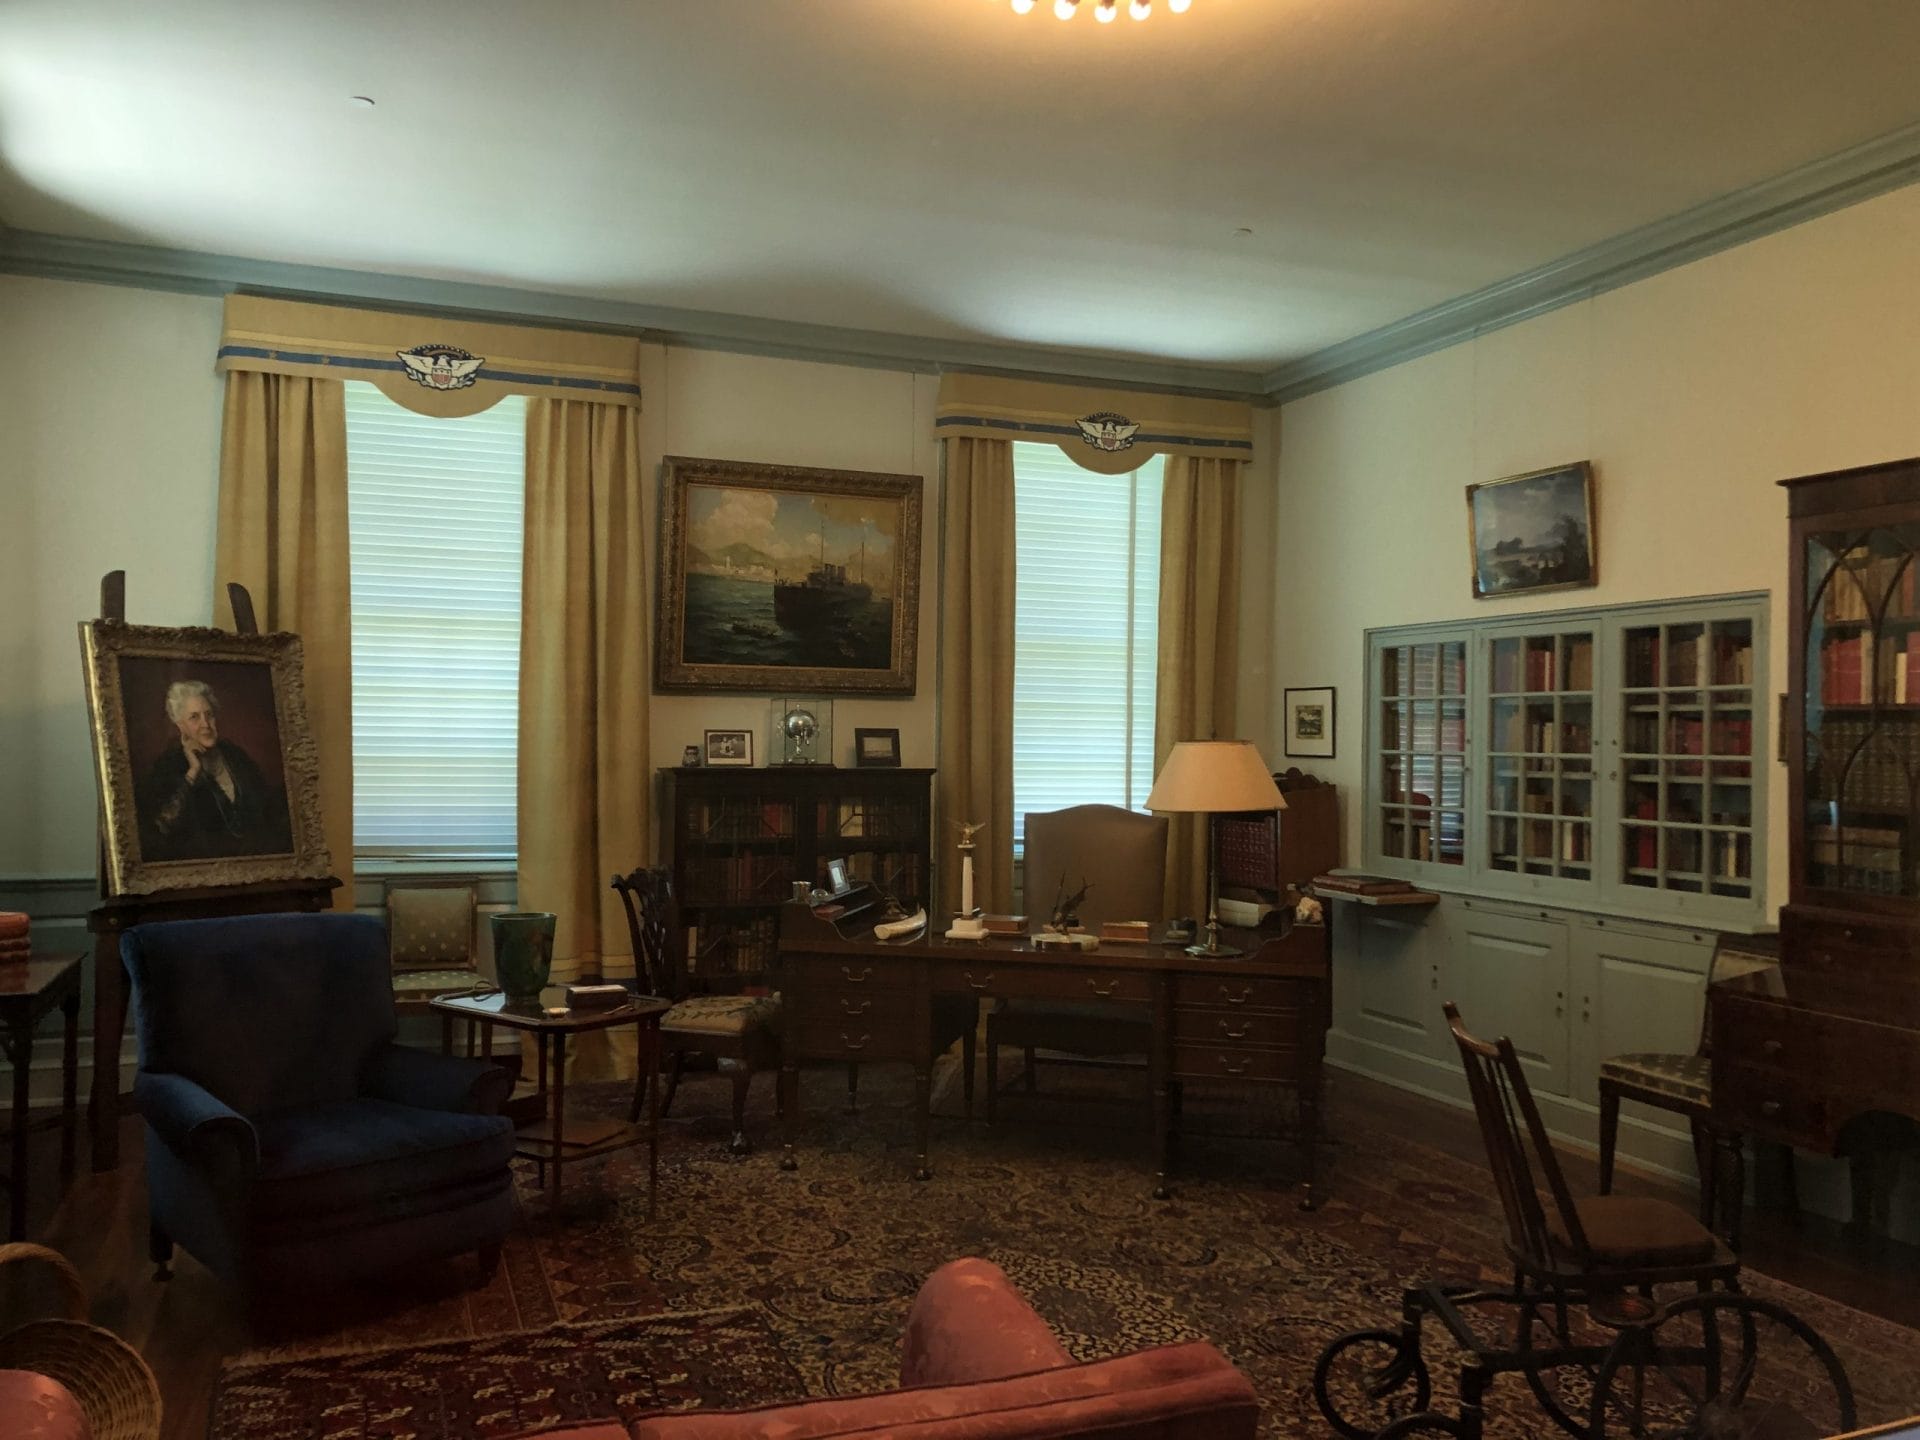 FDR's Private Study in Museum